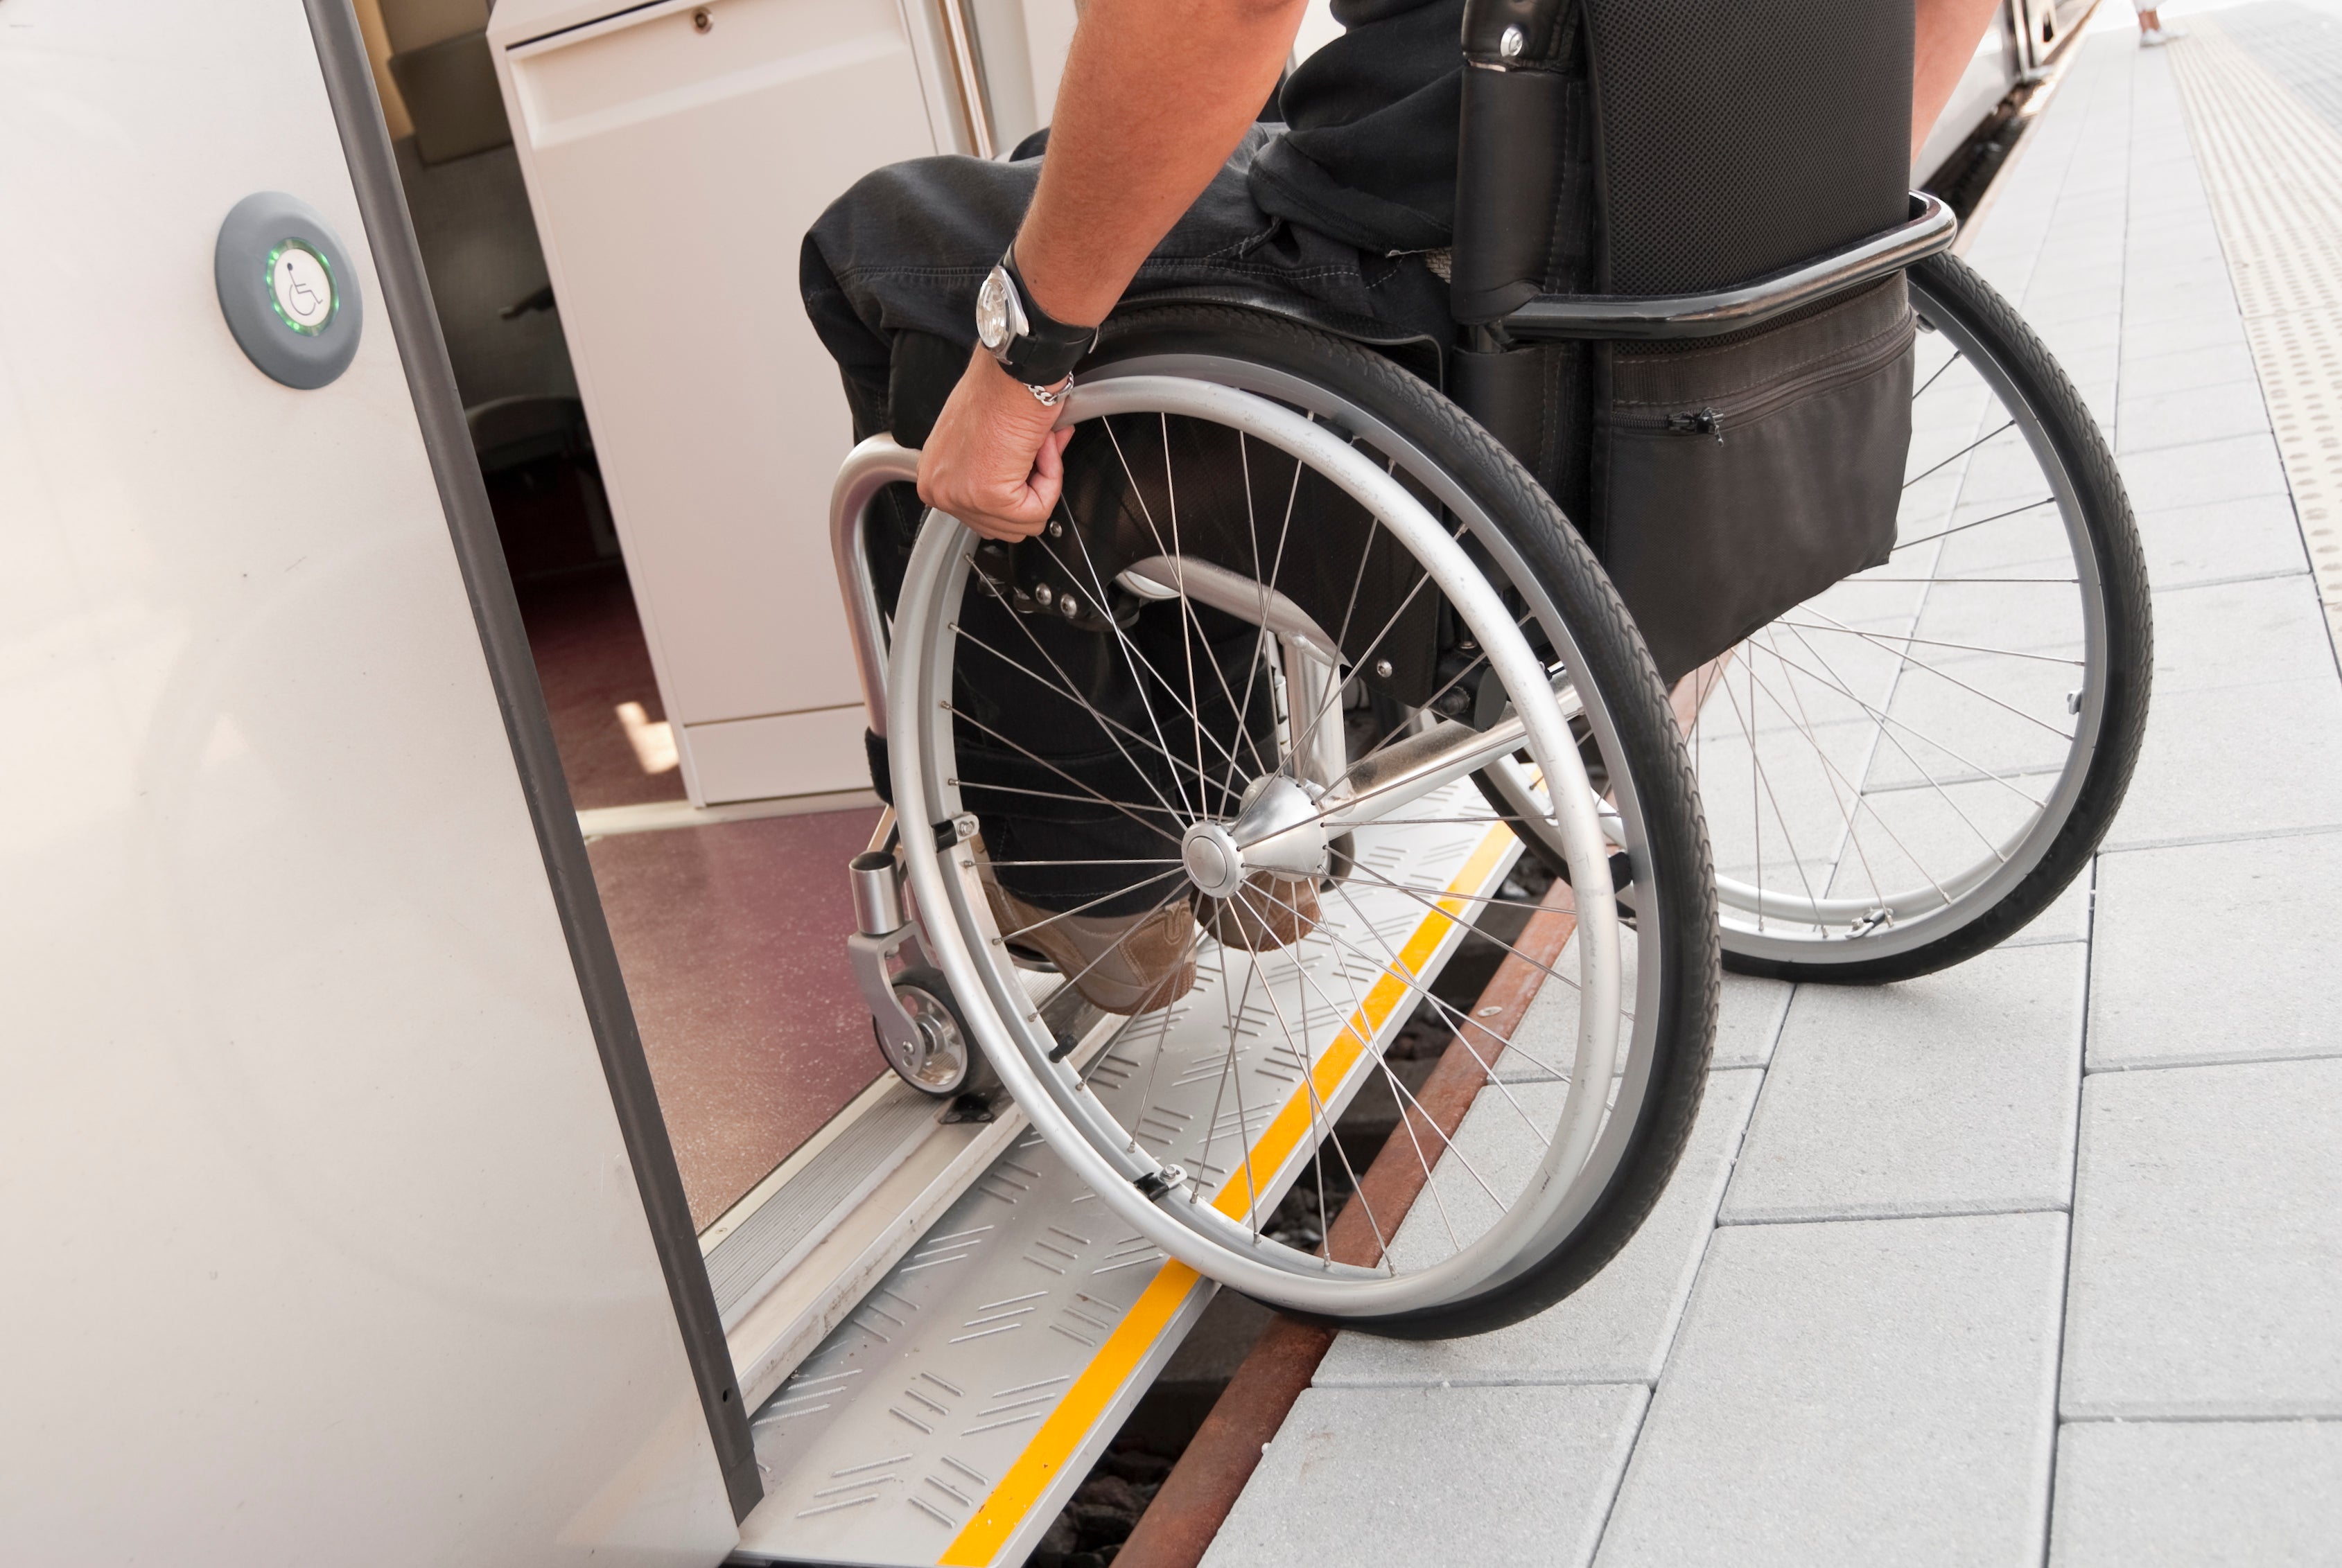 “Level boarding" between train and platform would make rail travel more accessible to wheelchair users